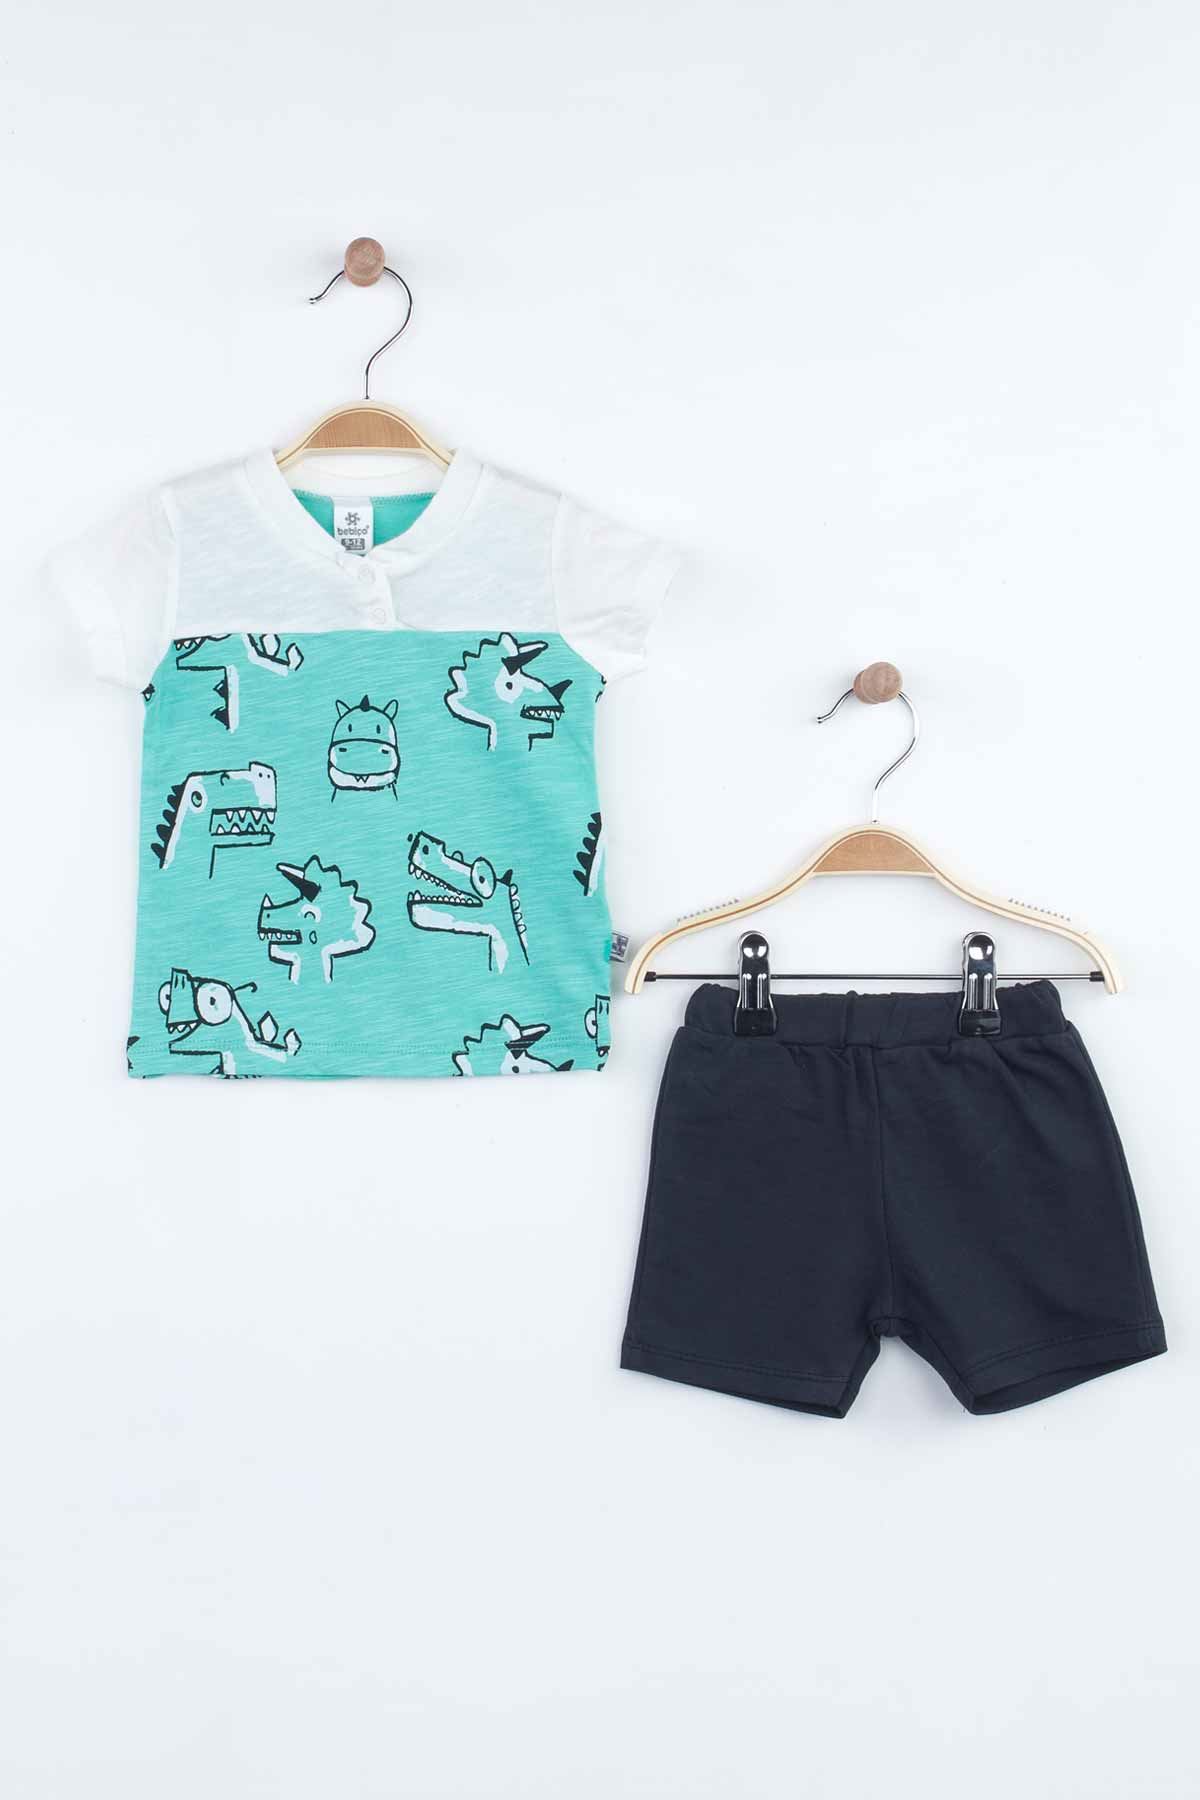 Green Baby Boy Shorts Set Summer 2021 Fashion Babies Boys Outfit Cotton Casual Vacation Use Clothing Model